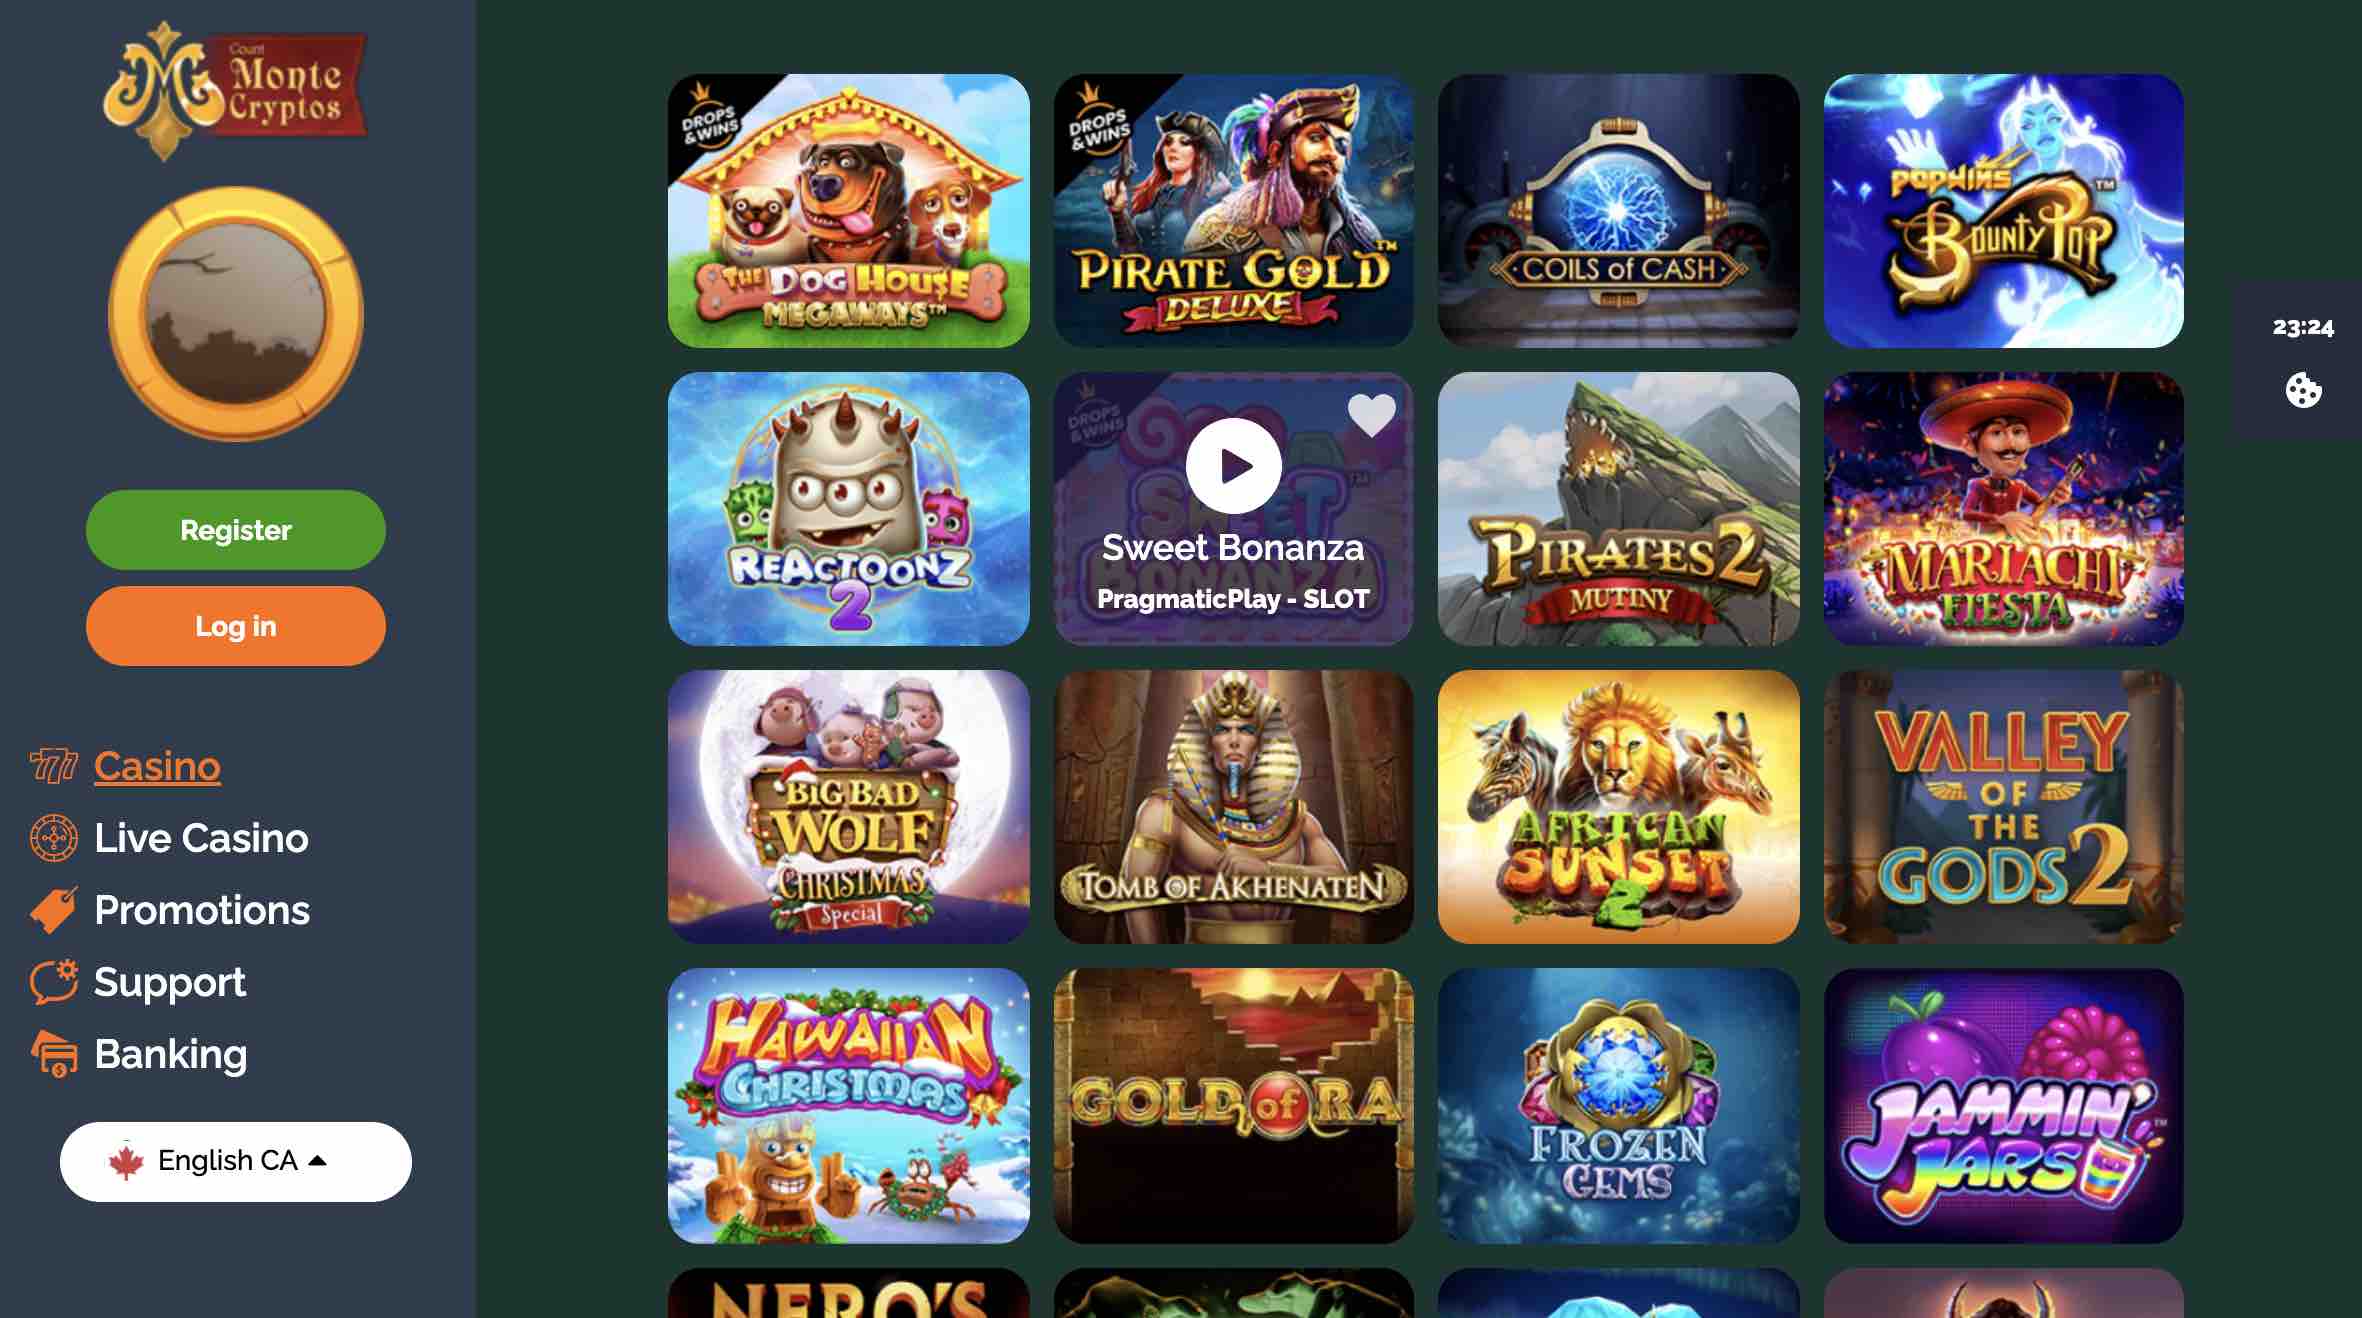 montecryptos casino slots and table games